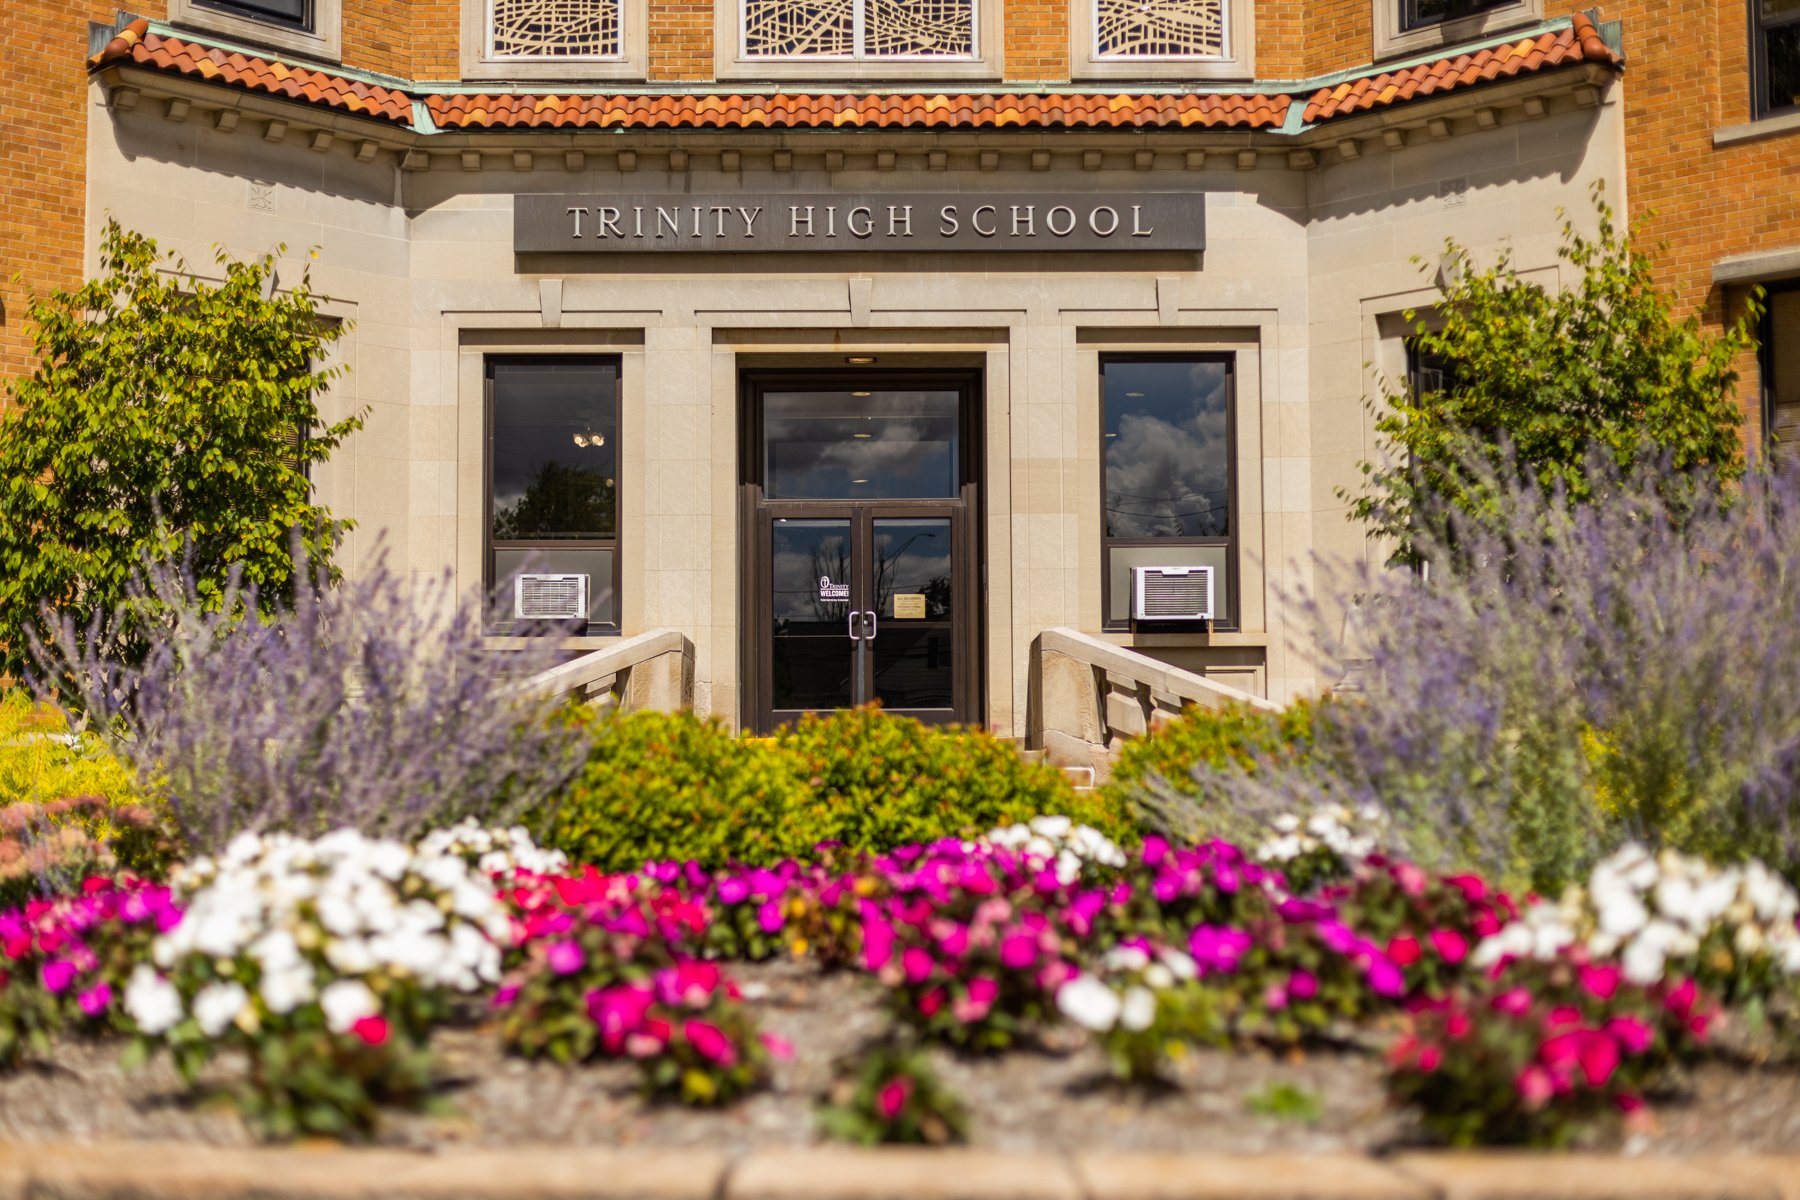 Trinity High School Landscaping Gains an Improved Image by Outsourcing Commercial Maintenance